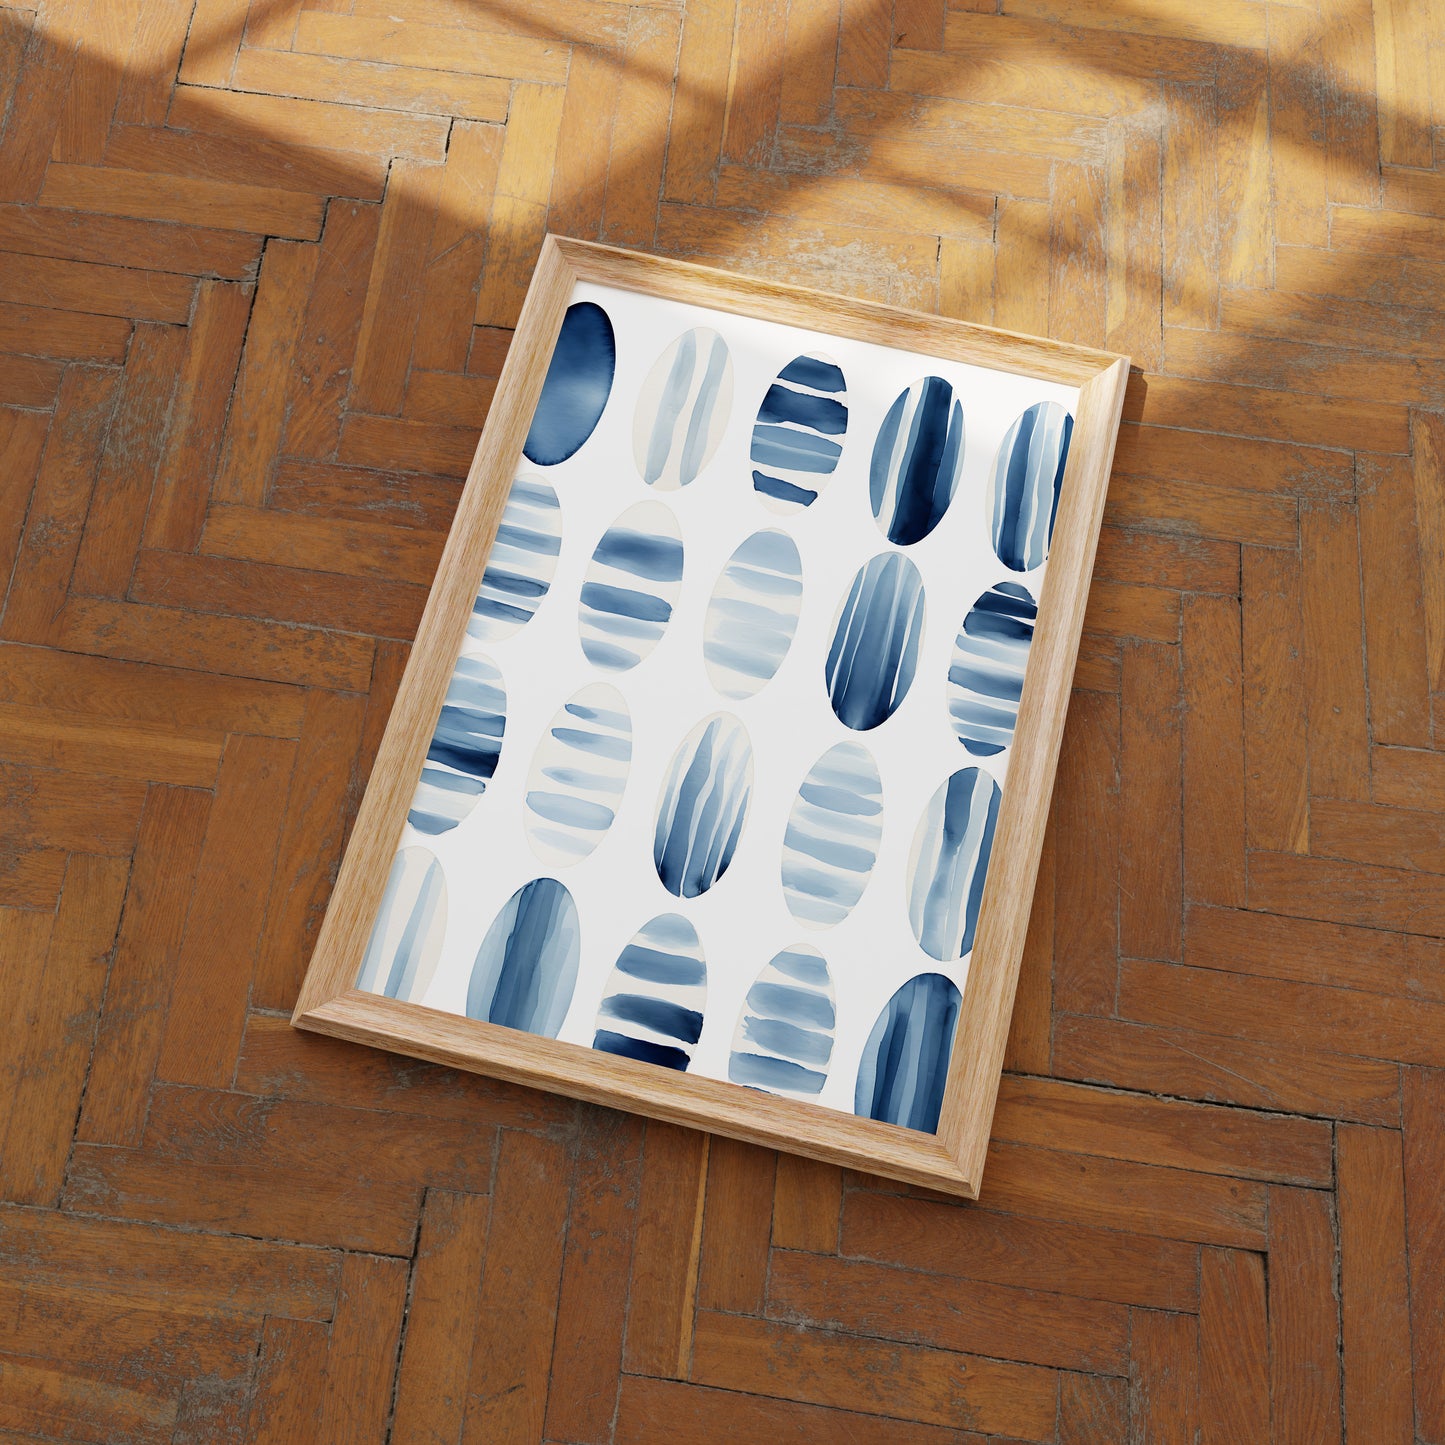 A framed abstract painting with blue and gray patterns on a wooden floor.